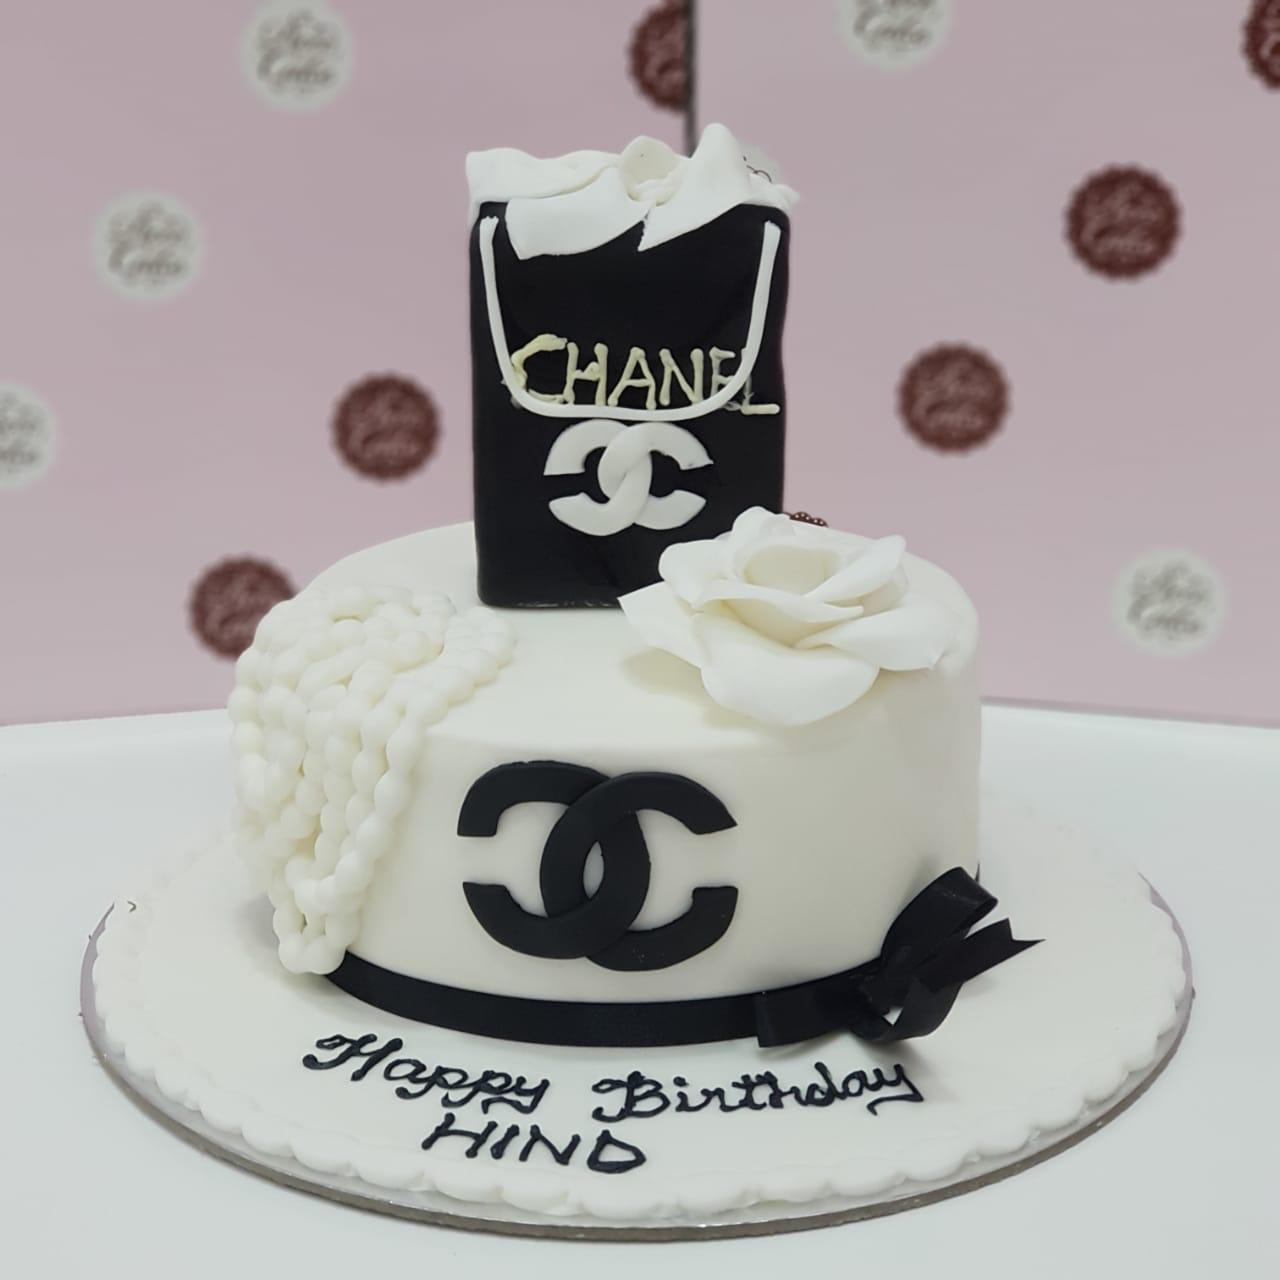 Birthday Cakes in Dubai, online Cake Delivery in Dubai ,Top Birthday Cake shop in Dubai, best cake shop in dubai Best Cakes in Dubai which you can not miss